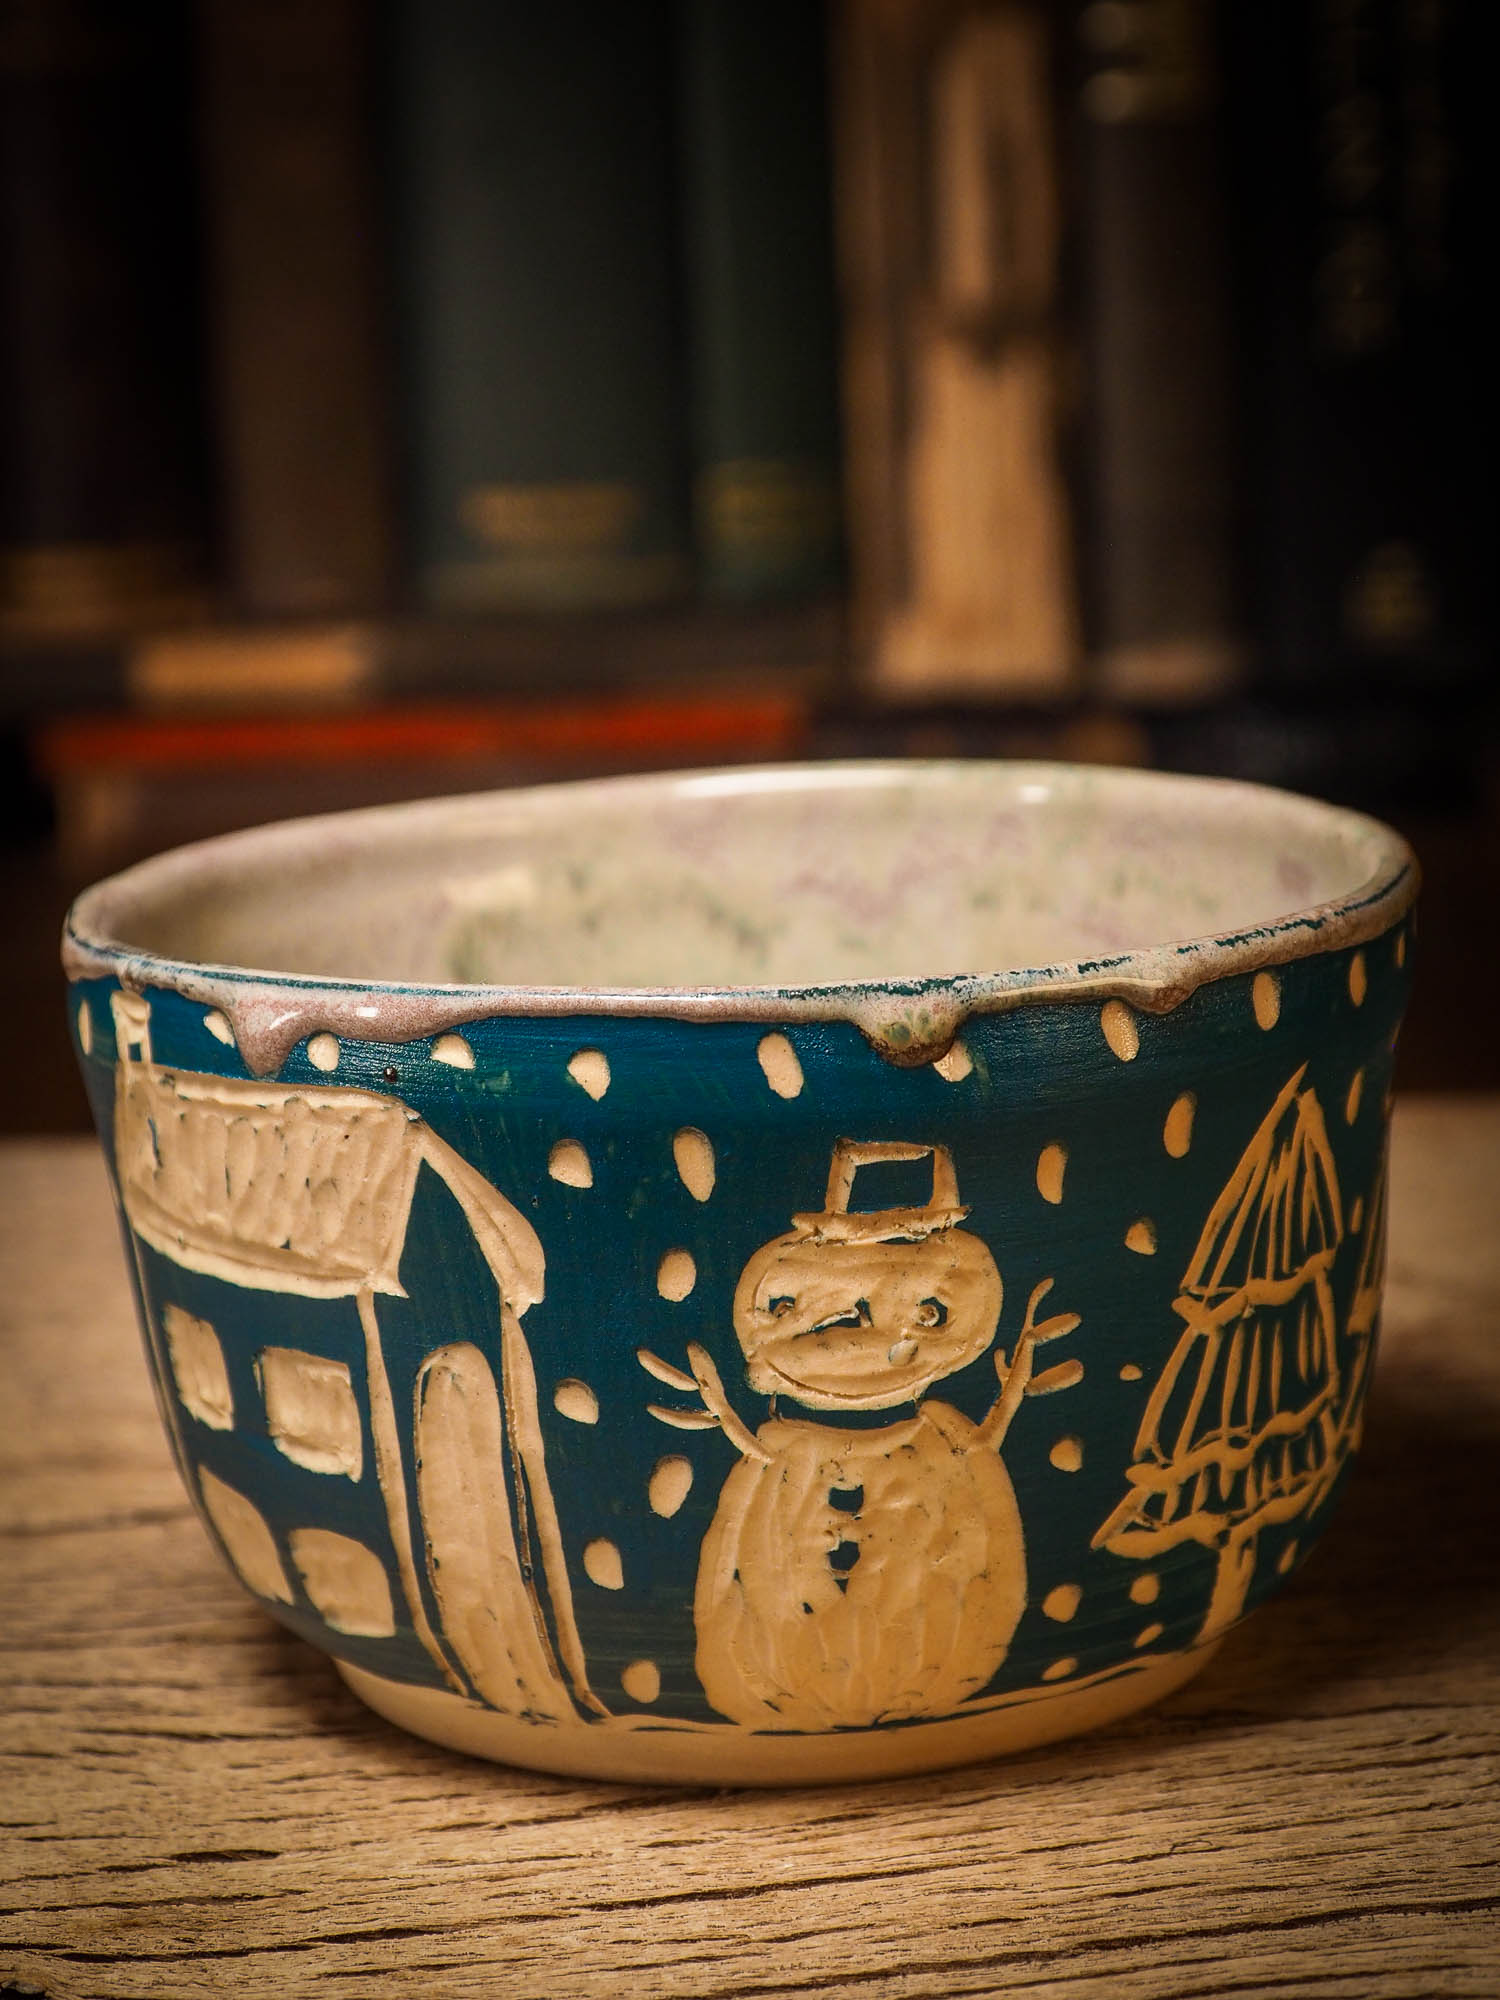 An original Christmas fire glazed ceramic handmade piece by Idania Salcido, the artist behind Danita Art. Glazed, carved sgraffito stoneware, hand painted and decorated, it is illustrated by hand with snowmen, Christmas trees, Santa Claus, angels and snow balls and winter themes.